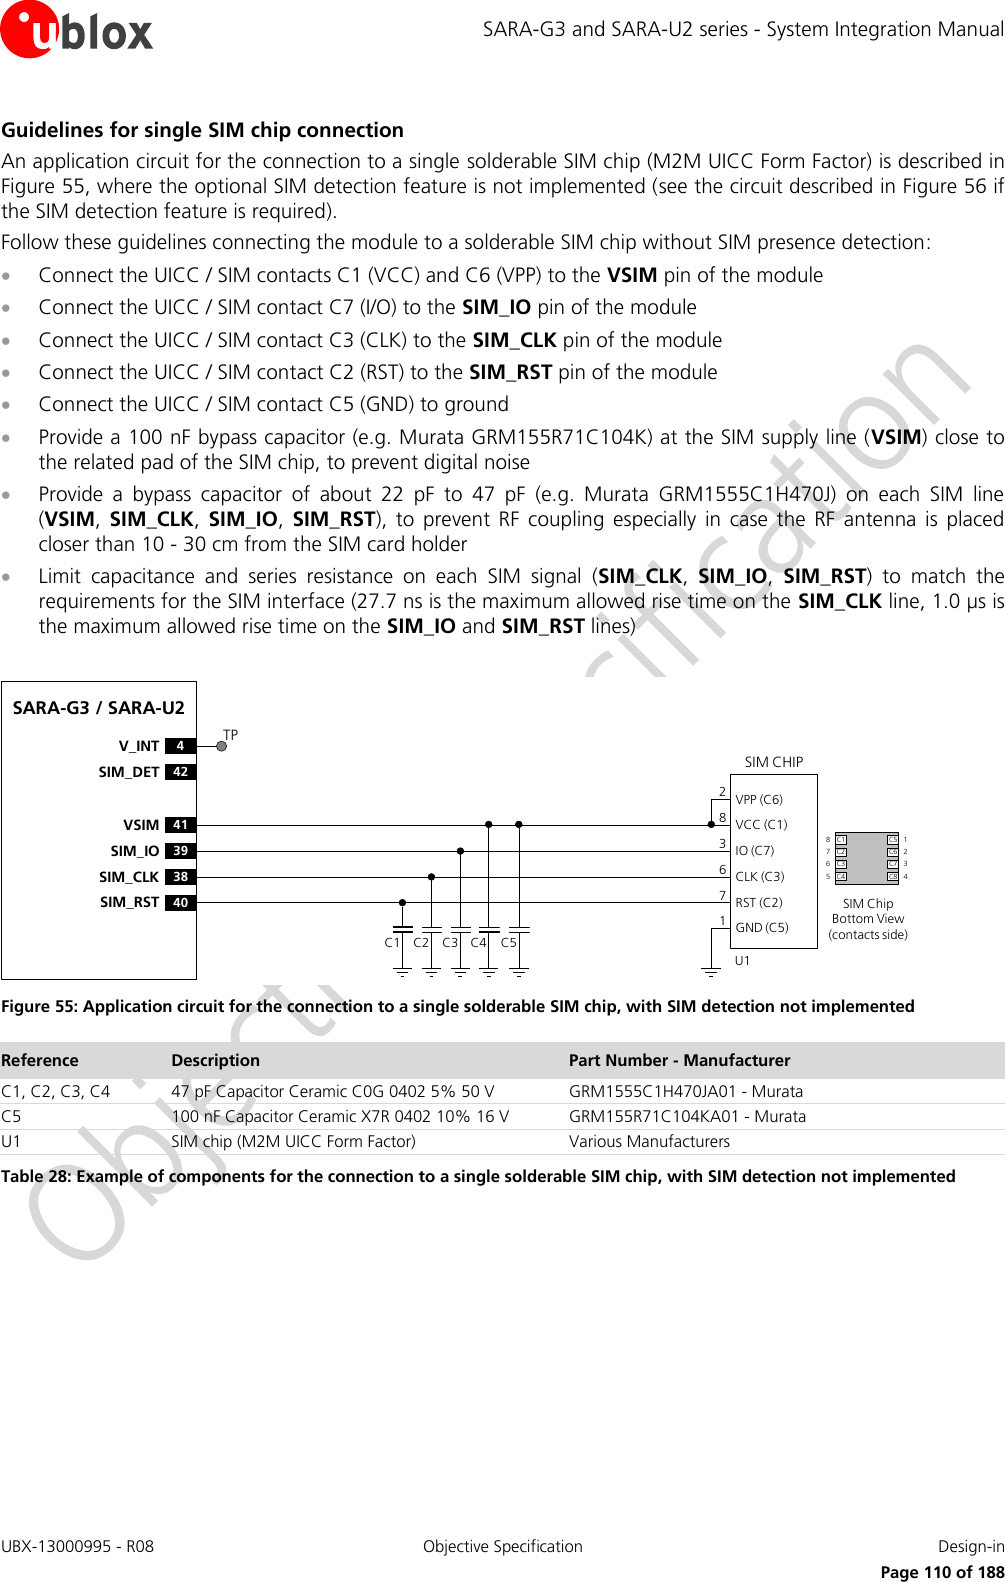 SARA-G3 and SARA-U2 series - System Integration Manual UBX-13000995 - R08  Objective Specification  Design-in     Page 110 of 188 Guidelines for single SIM chip connection An application circuit for the connection to a single solderable SIM chip (M2M UICC Form Factor) is described in Figure 55, where the optional SIM detection feature is not implemented (see the circuit described in Figure 56 if the SIM detection feature is required). Follow these guidelines connecting the module to a solderable SIM chip without SIM presence detection:  Connect the UICC / SIM contacts C1 (VCC) and C6 (VPP) to the VSIM pin of the module  Connect the UICC / SIM contact C7 (I/O) to the SIM_IO pin of the module  Connect the UICC / SIM contact C3 (CLK) to the SIM_CLK pin of the module  Connect the UICC / SIM contact C2 (RST) to the SIM_RST pin of the module  Connect the UICC / SIM contact C5 (GND) to ground  Provide a 100 nF bypass capacitor (e.g. Murata GRM155R71C104K) at the SIM supply line (VSIM) close to the related pad of the SIM chip, to prevent digital noise   Provide  a  bypass  capacitor  of  about  22  pF  to  47  pF  (e.g.  Murata  GRM1555C1H470J)  on  each  SIM  line (VSIM, SIM_CLK,  SIM_IO,  SIM_RST),  to  prevent  RF  coupling  especially  in  case  the  RF  antenna  is  placed closer than 10 - 30 cm from the SIM card holder  Limit  capacitance  and  series  resistance  on  each  SIM  signal  (SIM_CLK,  SIM_IO,  SIM_RST)  to  match  the requirements for the SIM interface (27.7 ns is the maximum allowed rise time on the SIM_CLK line, 1.0 µs is the maximum allowed rise time on the SIM_IO and SIM_RST lines)  41VSIM39SIM_IO38SIM_CLK40SIM_RST4V_INT42SIM_DET SIM CHIPSIM ChipBottom View (contacts side)C1VPP (C6)VCC (C1)IO (C7)CLK (C3)RST (C2)GND (C5)C2 C3 C5U1C4283671C1 C5C2 C6C3 C7C4 C887651234TPSARA-G3 / SARA-U2 Figure 55: Application circuit for the connection to a single solderable SIM chip, with SIM detection not implemented Reference Description Part Number - Manufacturer C1, C2, C3, C4 47 pF Capacitor Ceramic C0G 0402 5% 50 V GRM1555C1H470JA01 - Murata C5 100 nF Capacitor Ceramic X7R 0402 10% 16 V GRM155R71C104KA01 - Murata U1 SIM chip (M2M UICC Form Factor) Various Manufacturers Table 28: Example of components for the connection to a single solderable SIM chip, with SIM detection not implemented  